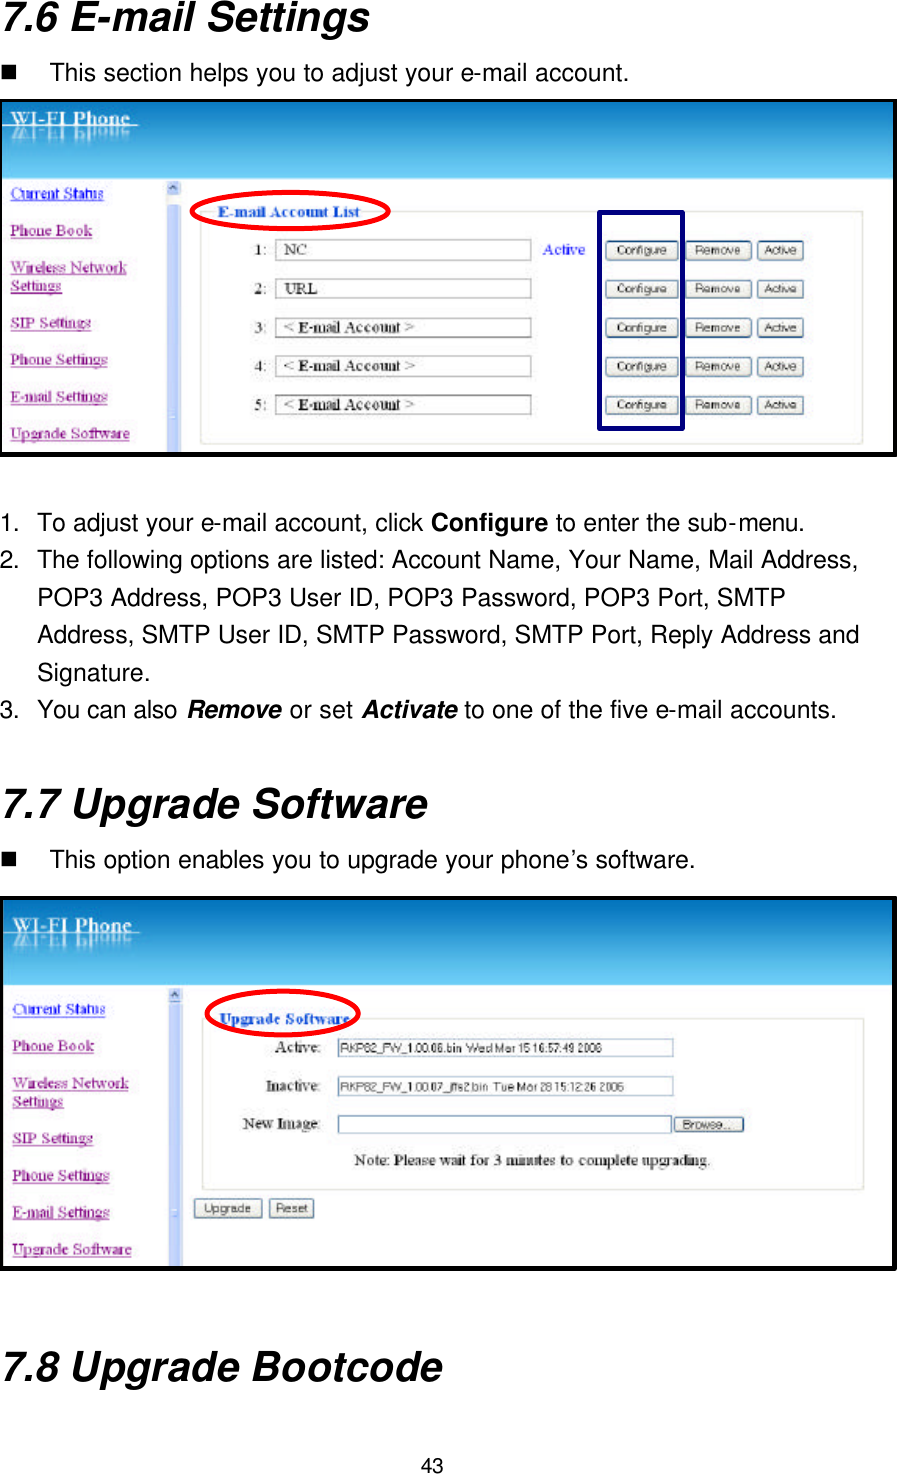  43 7.6 E-mail Settings n This section helps you to adjust your e-mail account.  1. To adjust your e-mail account, click Configure to enter the sub-menu. 2. The following options are listed: Account Name, Your Name, Mail Address, POP3 Address, POP3 User ID, POP3 Password, POP3 Port, SMTP Address, SMTP User ID, SMTP Password, SMTP Port, Reply Address and Signature.   3. You can also Remove or set Activate to one of the five e-mail accounts.  7.7 Upgrade Software n This option enables you to upgrade your phone’s software.  7.8 Upgrade Bootcode 